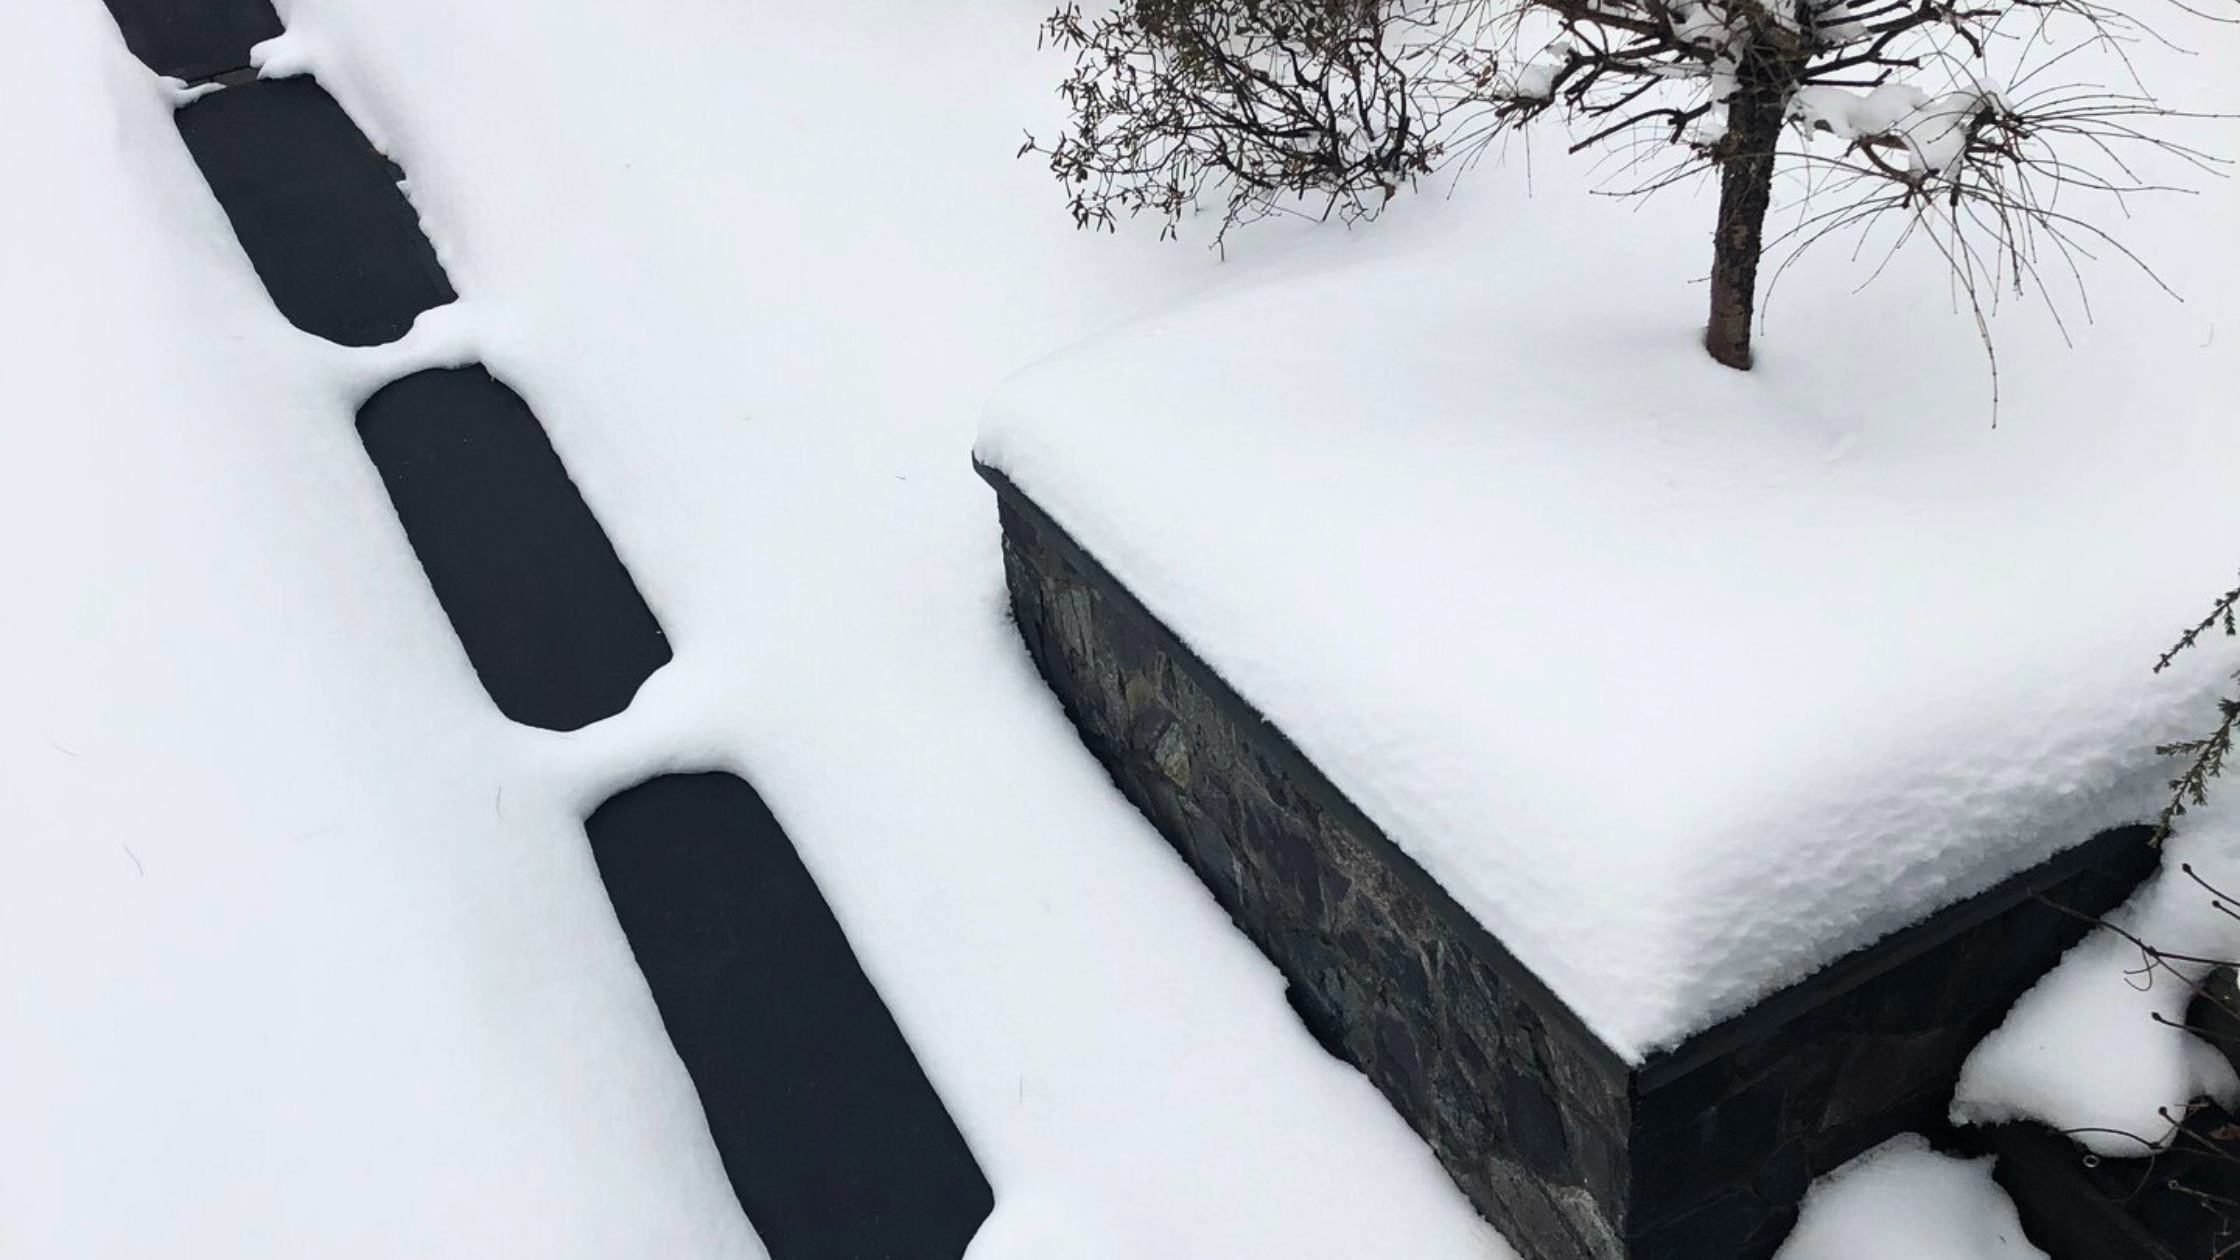 three snow melting mats in black are on a blanket of thick snow